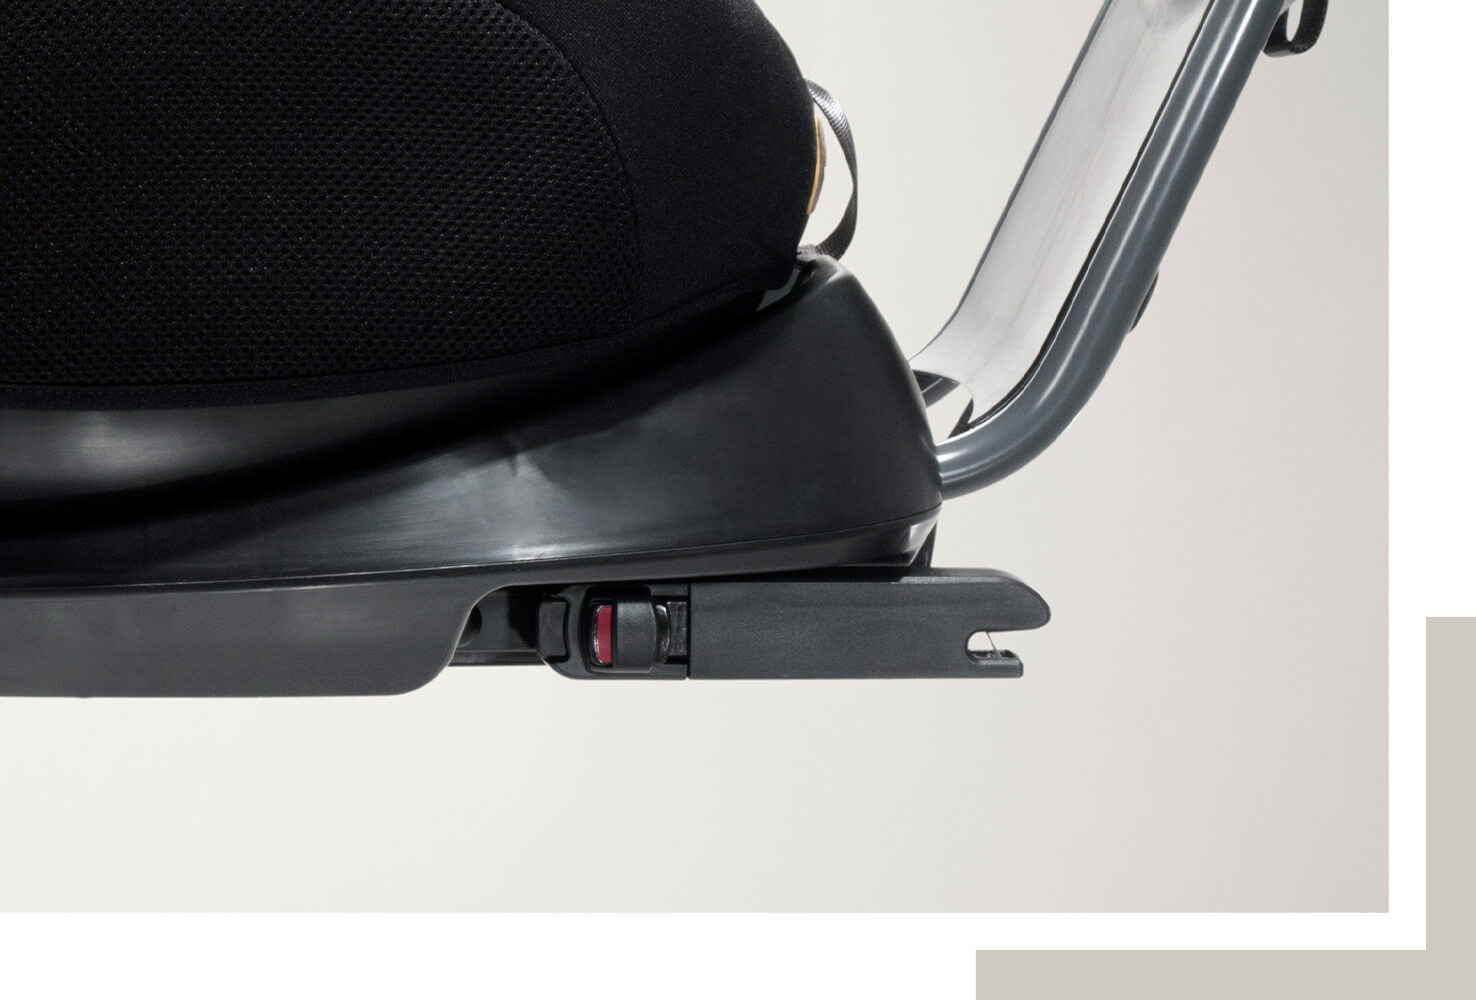   Joie Signature I-Prodigi in carbon gray and black with a close up of the ISOFIX connector point